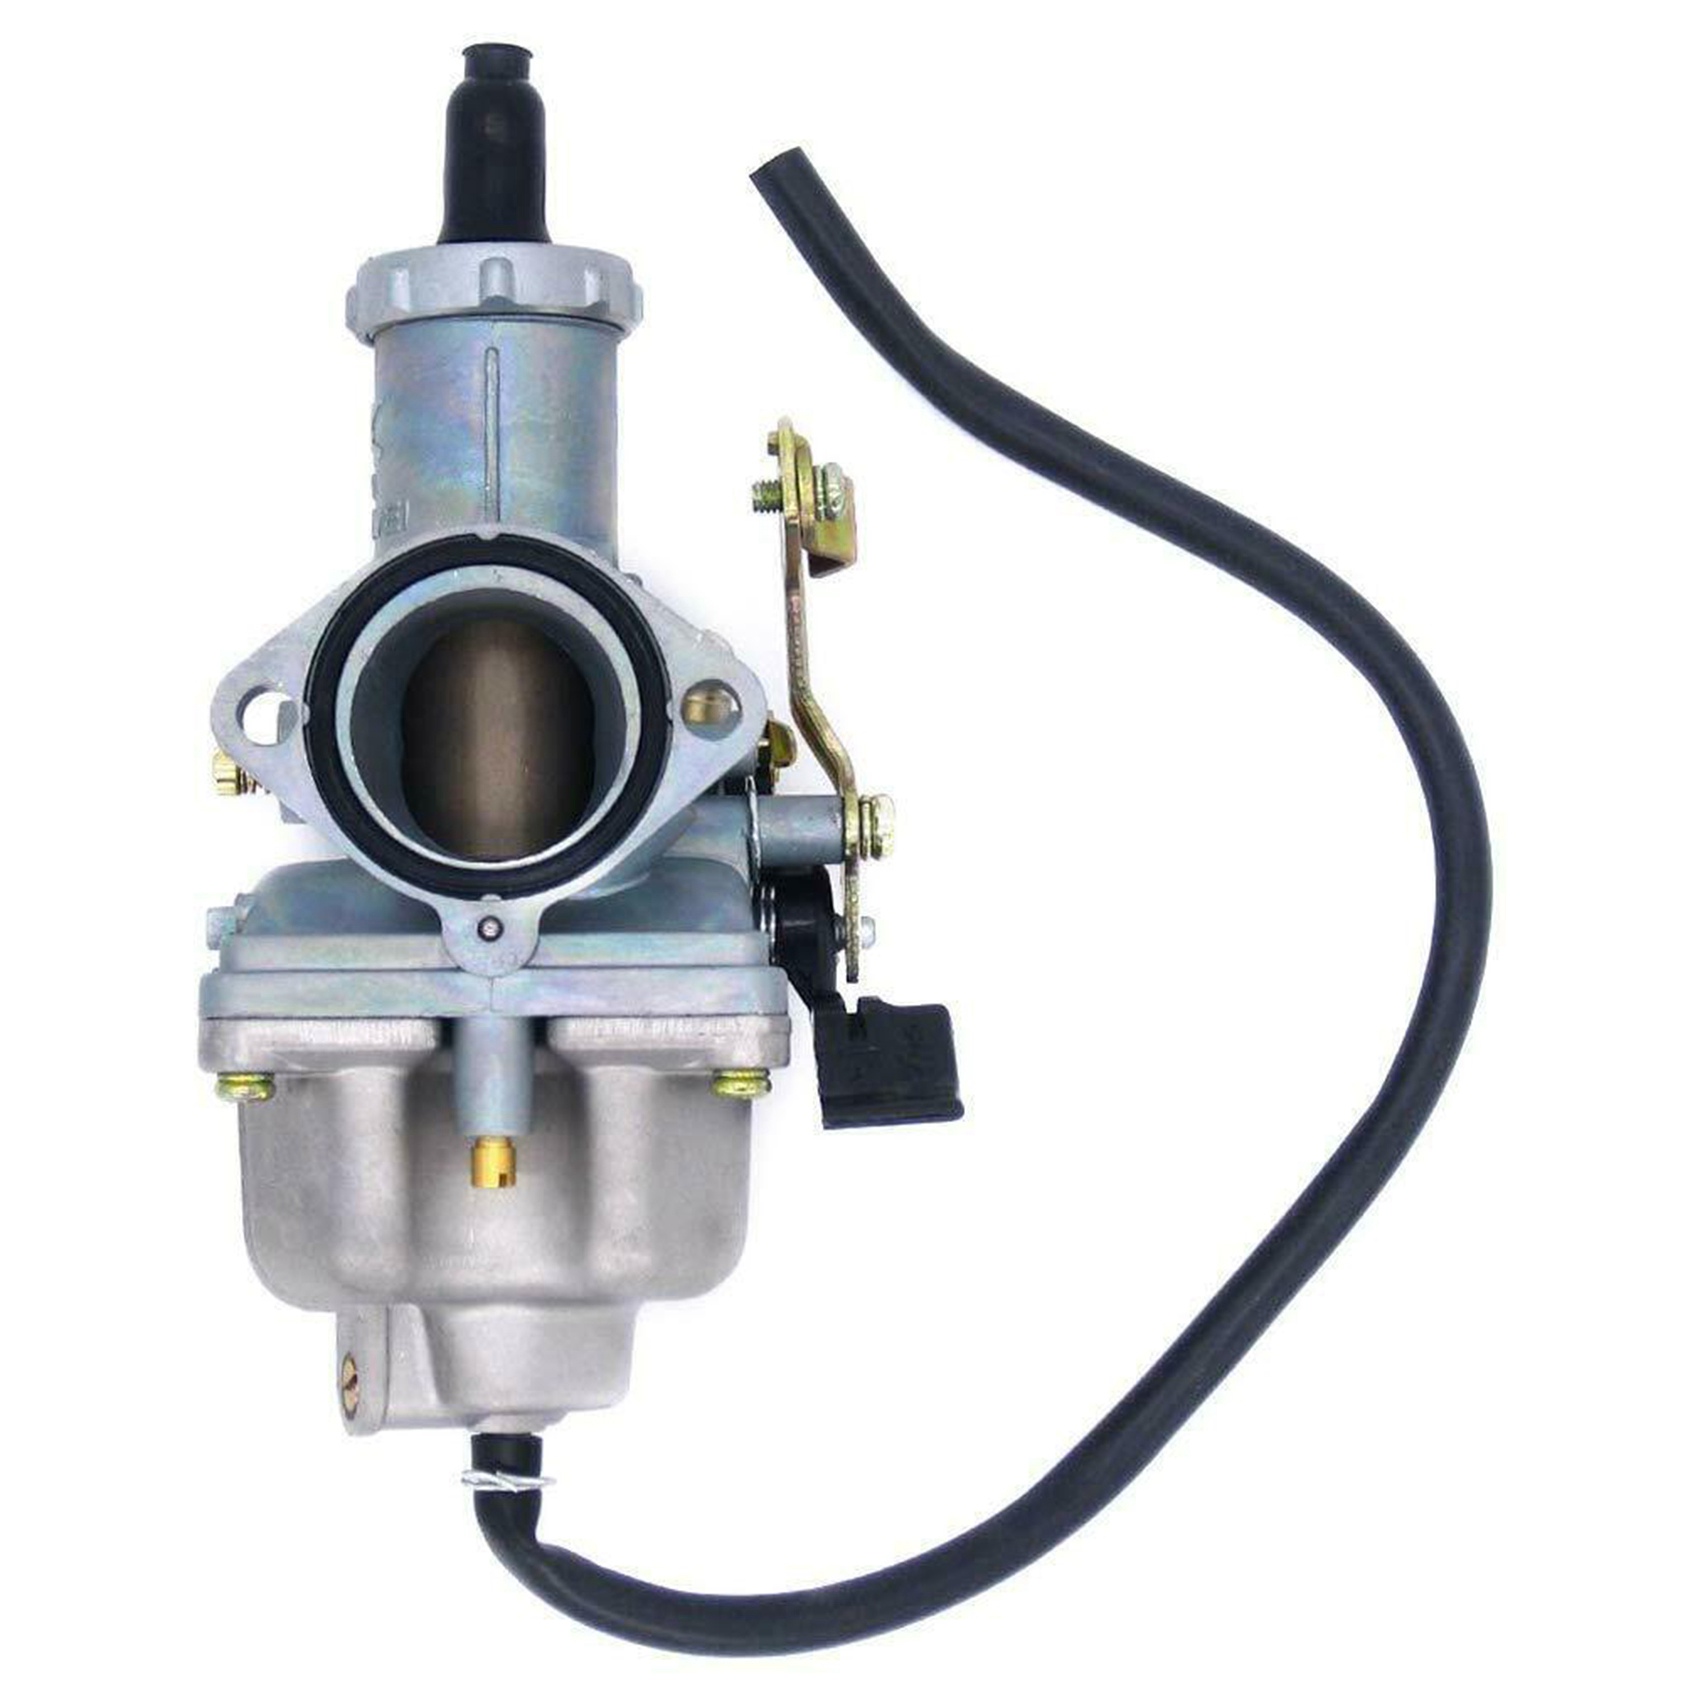 PZ30 Carburetor is Suitable for 200 250 300 Cc OffRoad Vehicles, with Manual Operation Chain ATV Scooter Light Engine